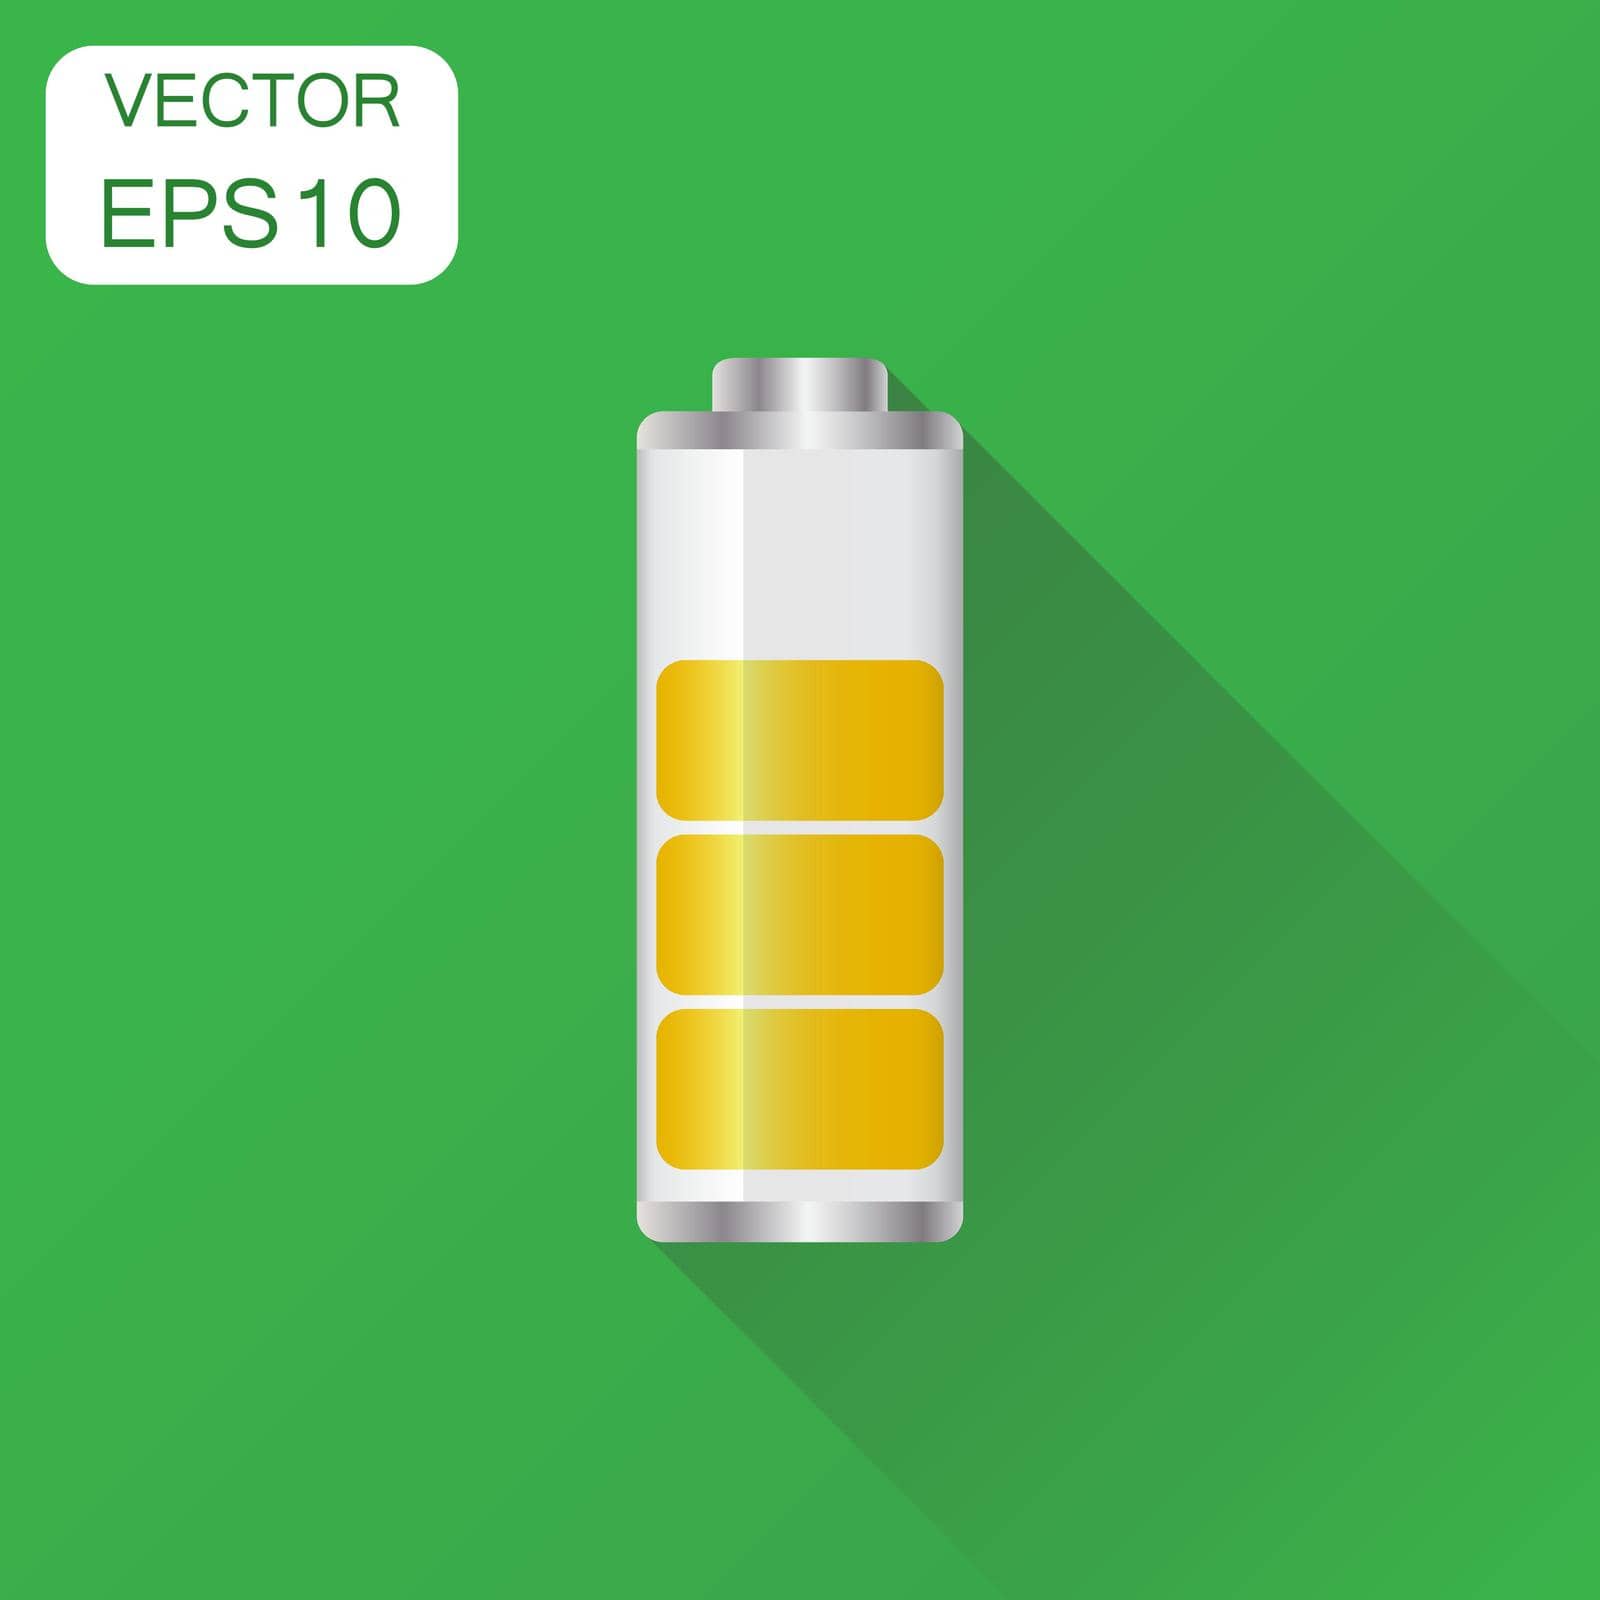 Battery charge level indicator icon. Business concept battery pictogram. Vector illustration on green background with long shadow. by LysenkoA